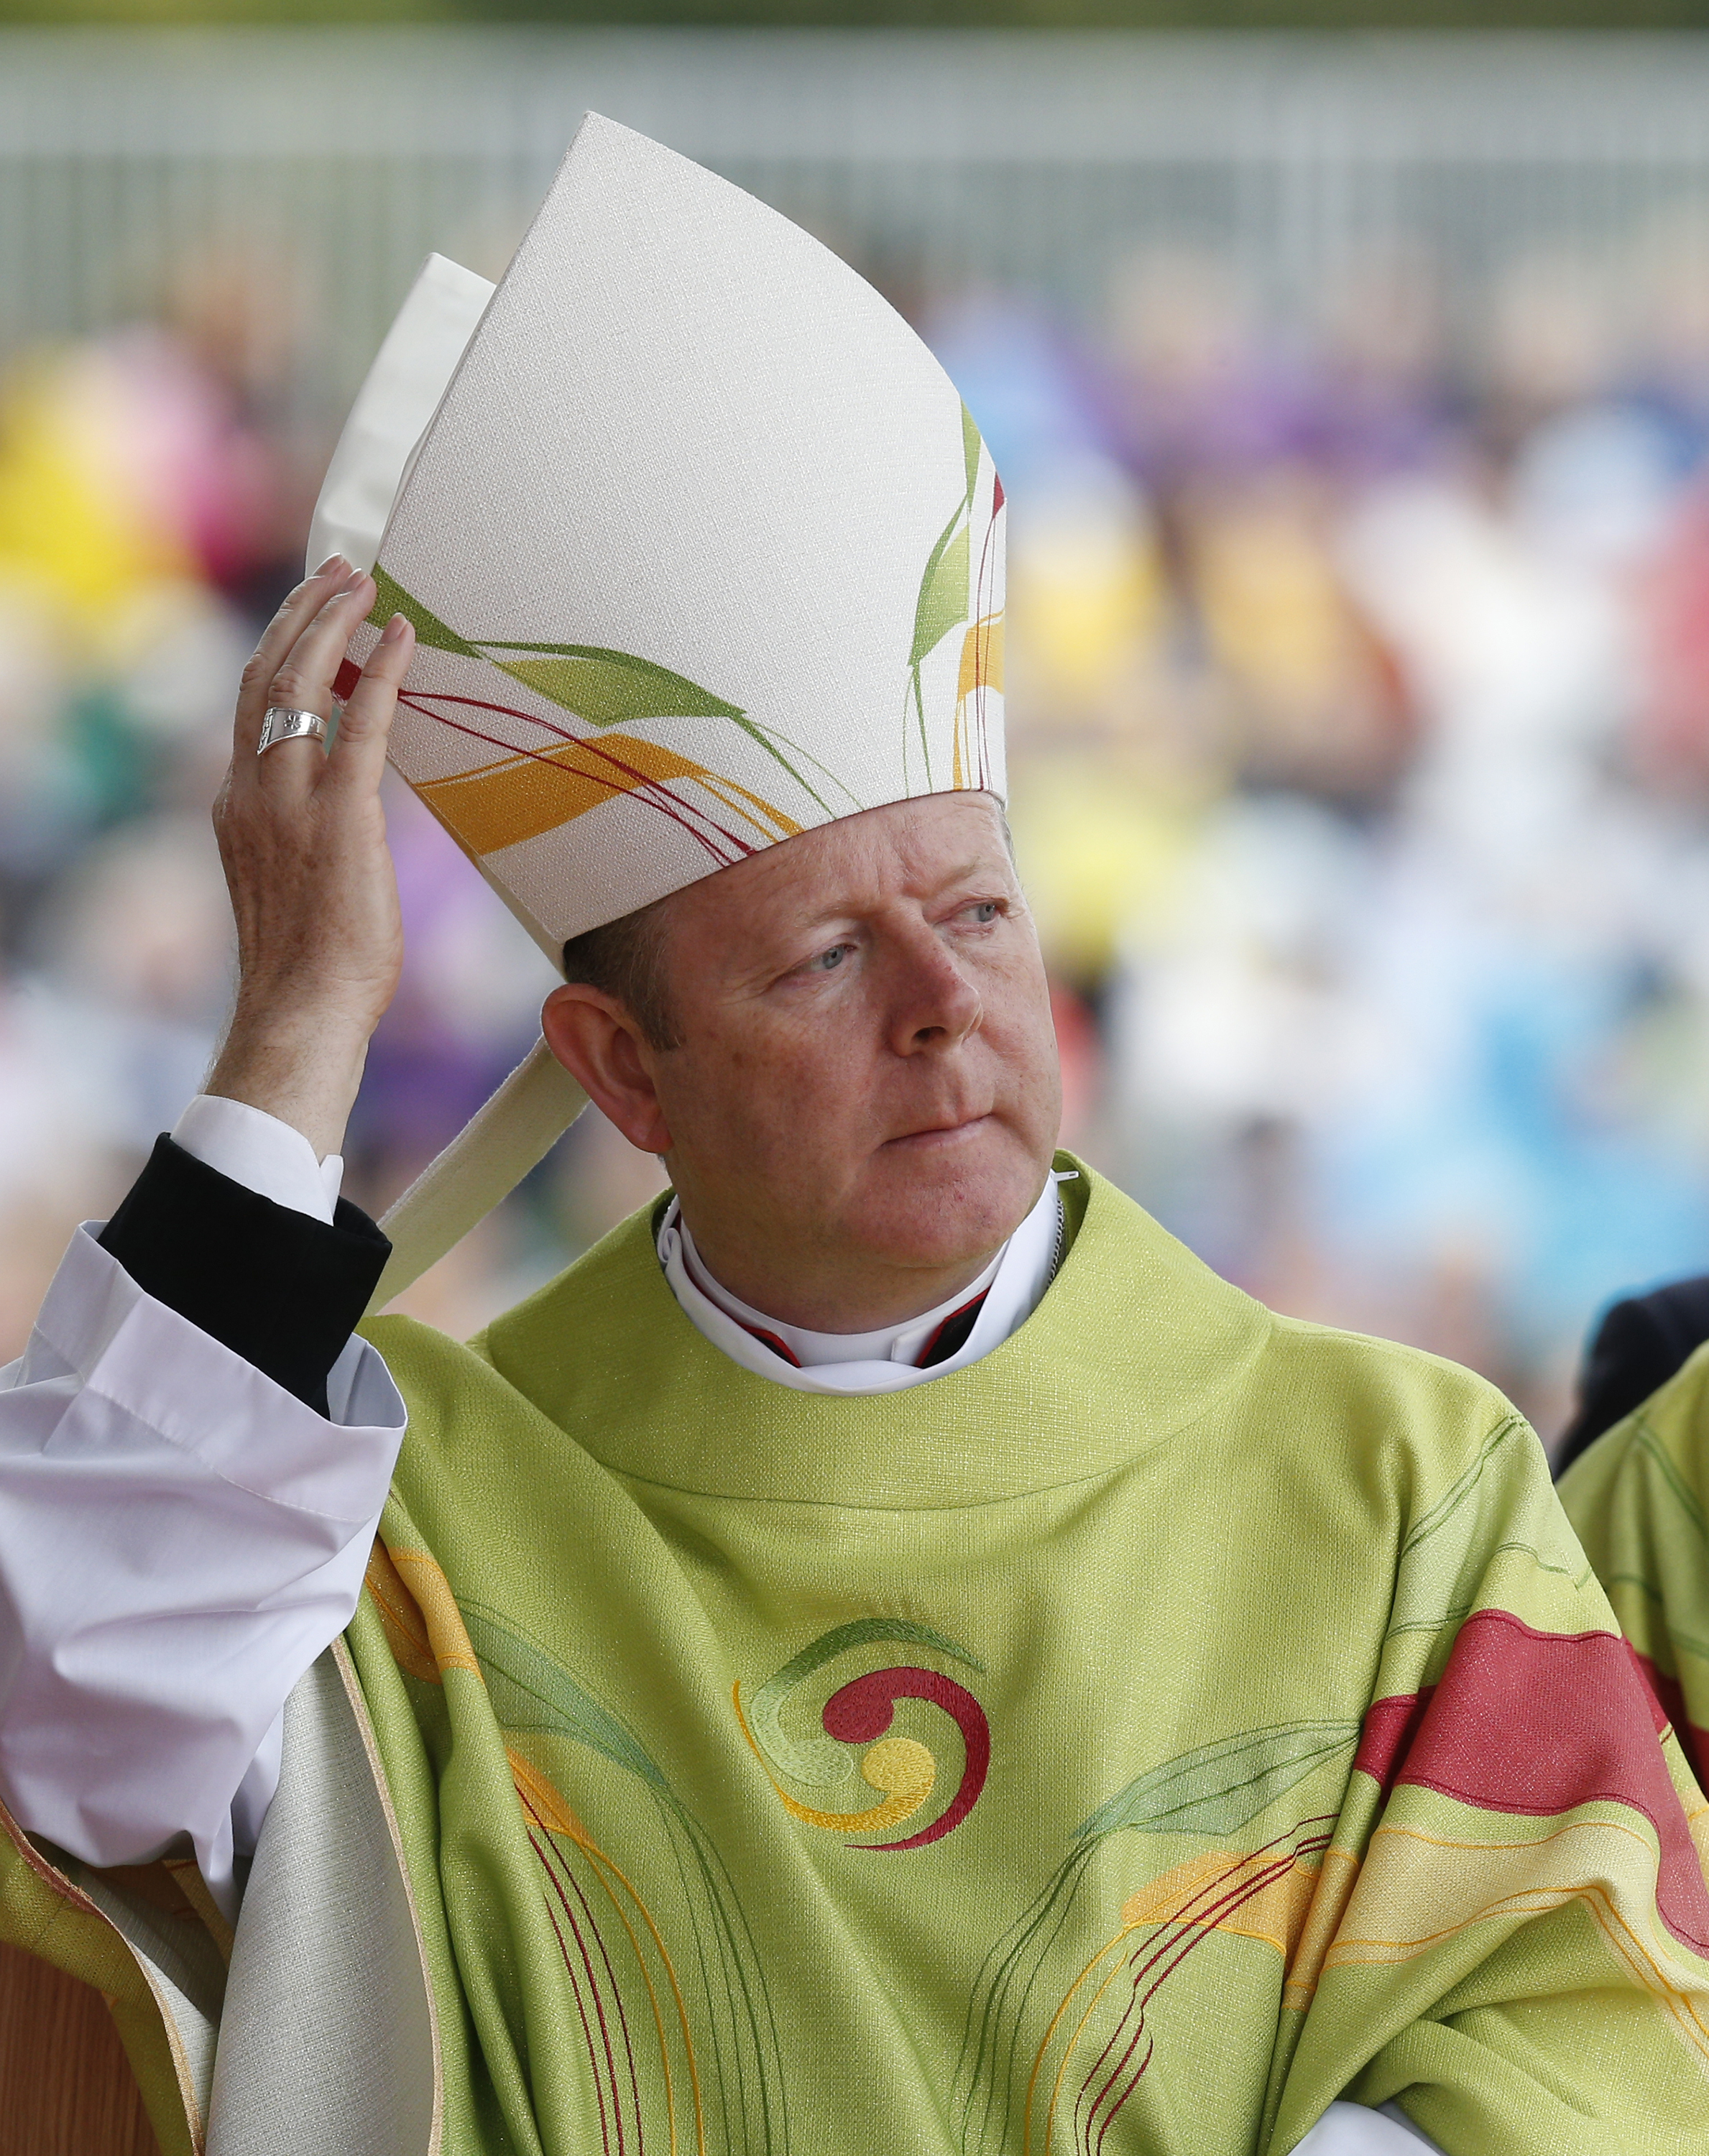 Accountability is key to safeguarding, says Archbishop of Armagh